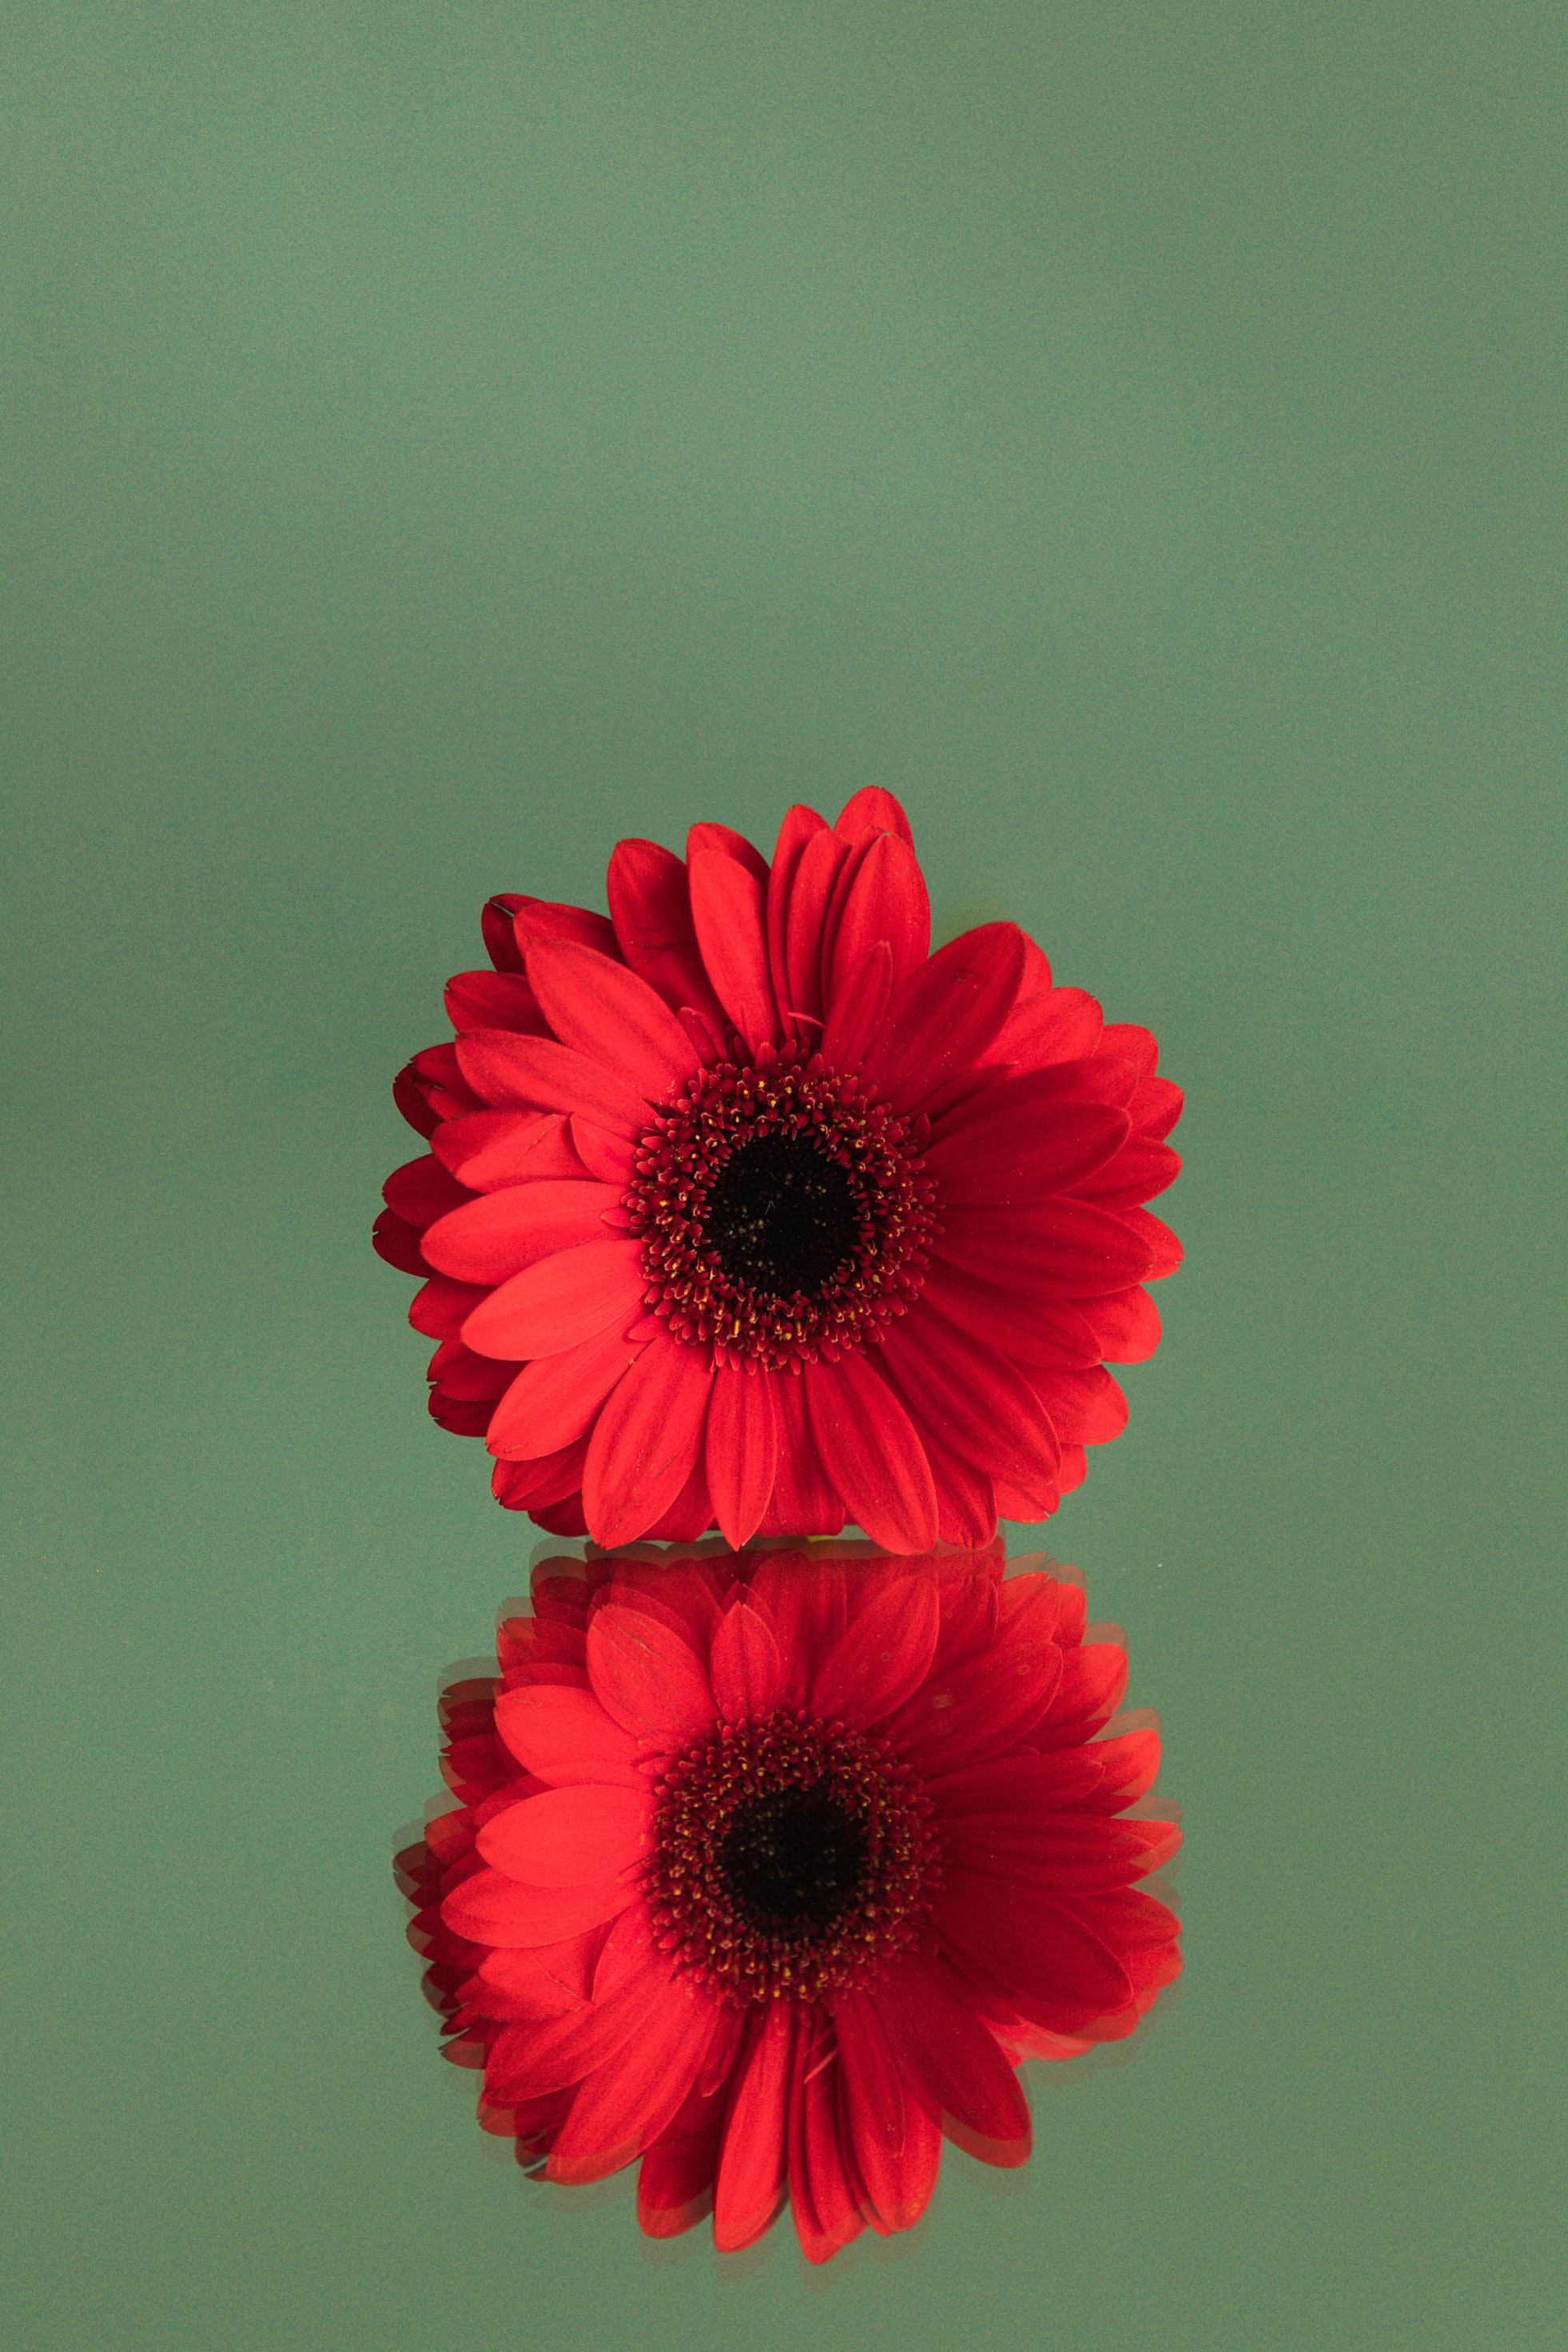 75447 Screensavers and Wallpapers Gerbera for phone. Download red, reflection, flower, minimalism, gerbera pictures for free